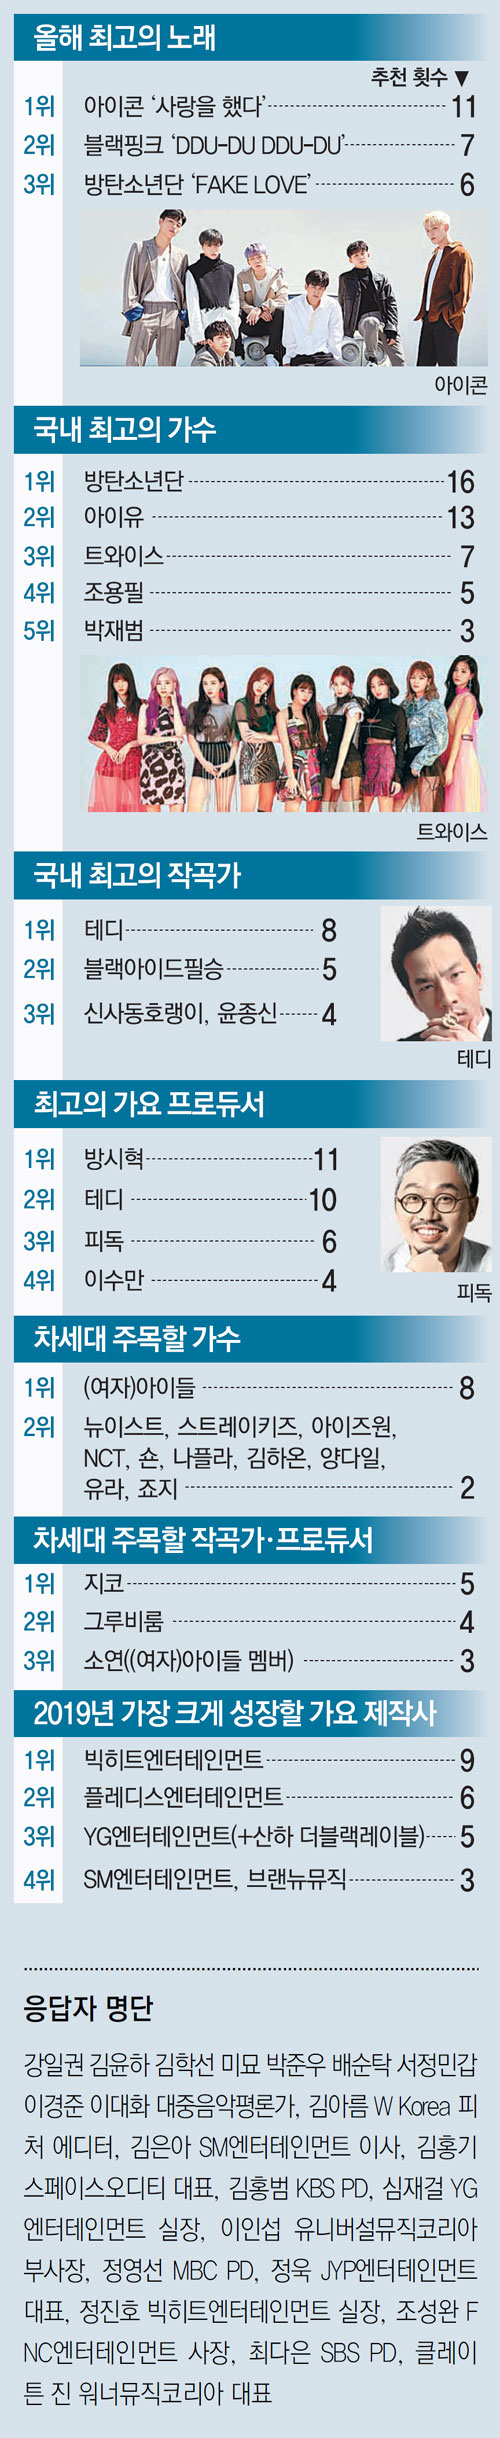 As a result of a survey of 21 experts including KAGAI agency officials and critics, the best singer in Korea is BTS, and the best producers are Bang Si-Hyuk Big Hit Entertainment representative who raised BTS.They were also considered as the next generations notable producers and singers, foreshadowing that the craze will not cool down easily.The industry expects BTS-owned Big Hit to go public soon, and expects a shift in the enterprise market.The big hit said, We dont have a listing plan at the moment. However, some predict that the market capitalization will reach 700 billion won, or 4 trillion won, if listed.Big Hit announced the fact that he signed a seven-year contract with BTS this year, a year before the contract was renewed, and announced the debut of the new group next year as the BTS members are approaching the military enlistment.JYPs lead is Twice, which has been a series of hits since it started with CHEER UP in 2016 and recently hit YES or YES.Compared to Wonder Girls, Kara and Girls Generation, who have led the heyday of the womens group. Oricon chart first placeThe popularity of the male group Godseven continues, but it was early established in World, including Europe, as it was overshadowed by the BTSs vigil.Band-type Idol Daysix is also expanding its territory to World.J. Y. Parks leadership remains solid.On holidays, he enjoys basketball, plays active dancer and producer, and is a friendly and young leader who is sometimes called brother to his singers.He monopolized the development of composition, production, and concept, and in 2014, he dismantled the one-top system and turned it into a selection committee system that promoted collective intelligence.He founded JYP Publishing to train lyricists and composers. The flowers and fruits were ripe.The power and know-how of the 20-year-old music industry SM cannot be ignored. Exos new works still sell a million copies.The next generation of runners, NCT 127 and NCT Dreams, show changes in SM, which has largely embraced hip-hop and electronic music that eased the long-standing SM style and penetrated the current.A sophisticated music that collaborates with European composers, and SM-type Idol talent with unique charms are combined here.Lee Soo-man, who sprinkled the seeds of the K-pop system early in the 1990s, is still in his 60s and is still a general producer, offering a splashing idea that captures teenagers.Twenty-one experts in the music industry have also been highly likely to grow in Pledice Entertainment, which includes New East and Seventeen next year.Brand New Music, which started as a hip-hop record label and has even a Wanna One member, aims for Post YG under the direction of Raimer, a rapper-turned-president.Changes in the Market of the Music Agency